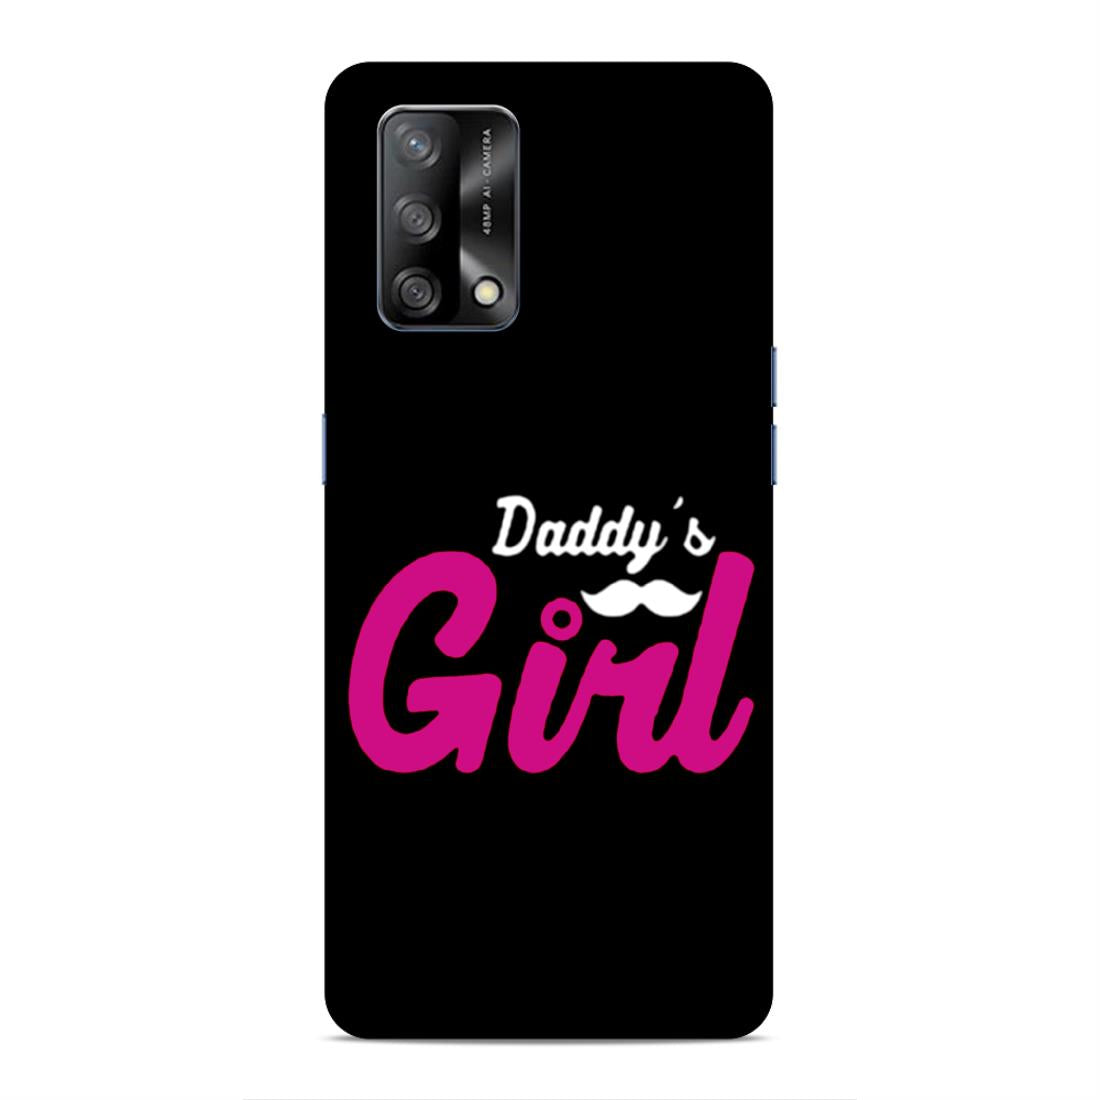 Daddy's Girl Hard Back Case For Oppo F19 / F19s